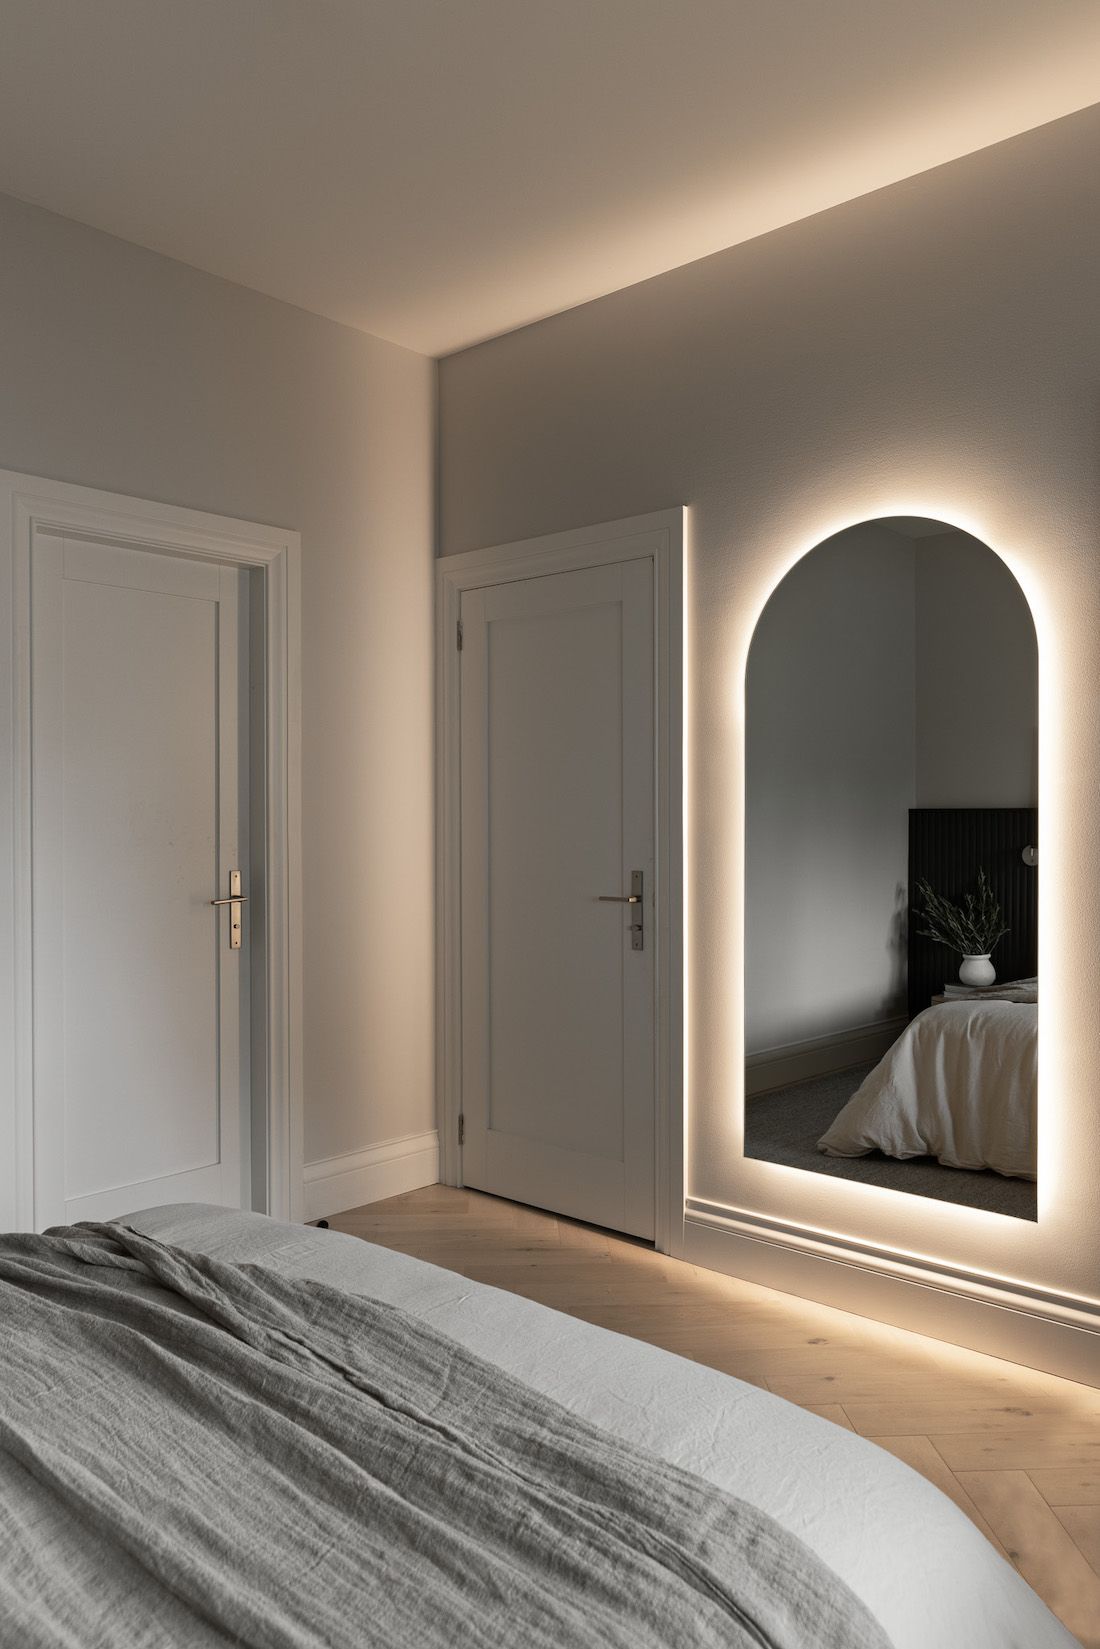 Mirror With Lights: Illuminating Your Reflection with Elegant Design